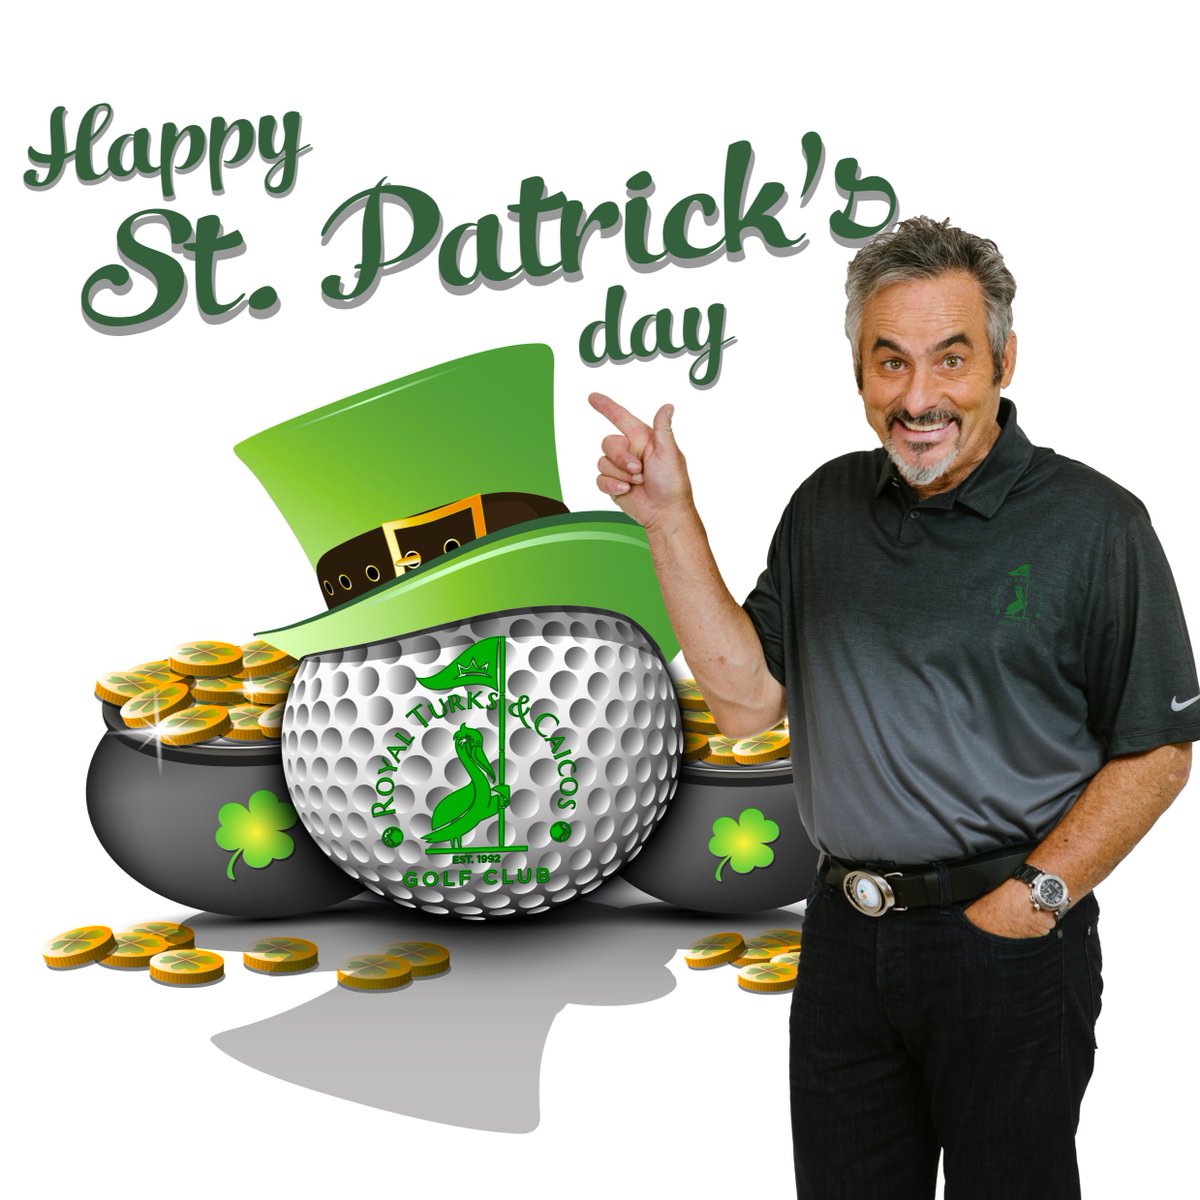 May today find you on the Green! Happy St Patrick's day from all of us @royalturksandcaicosgolfclub. ☘️☘️☘️☘️☘️